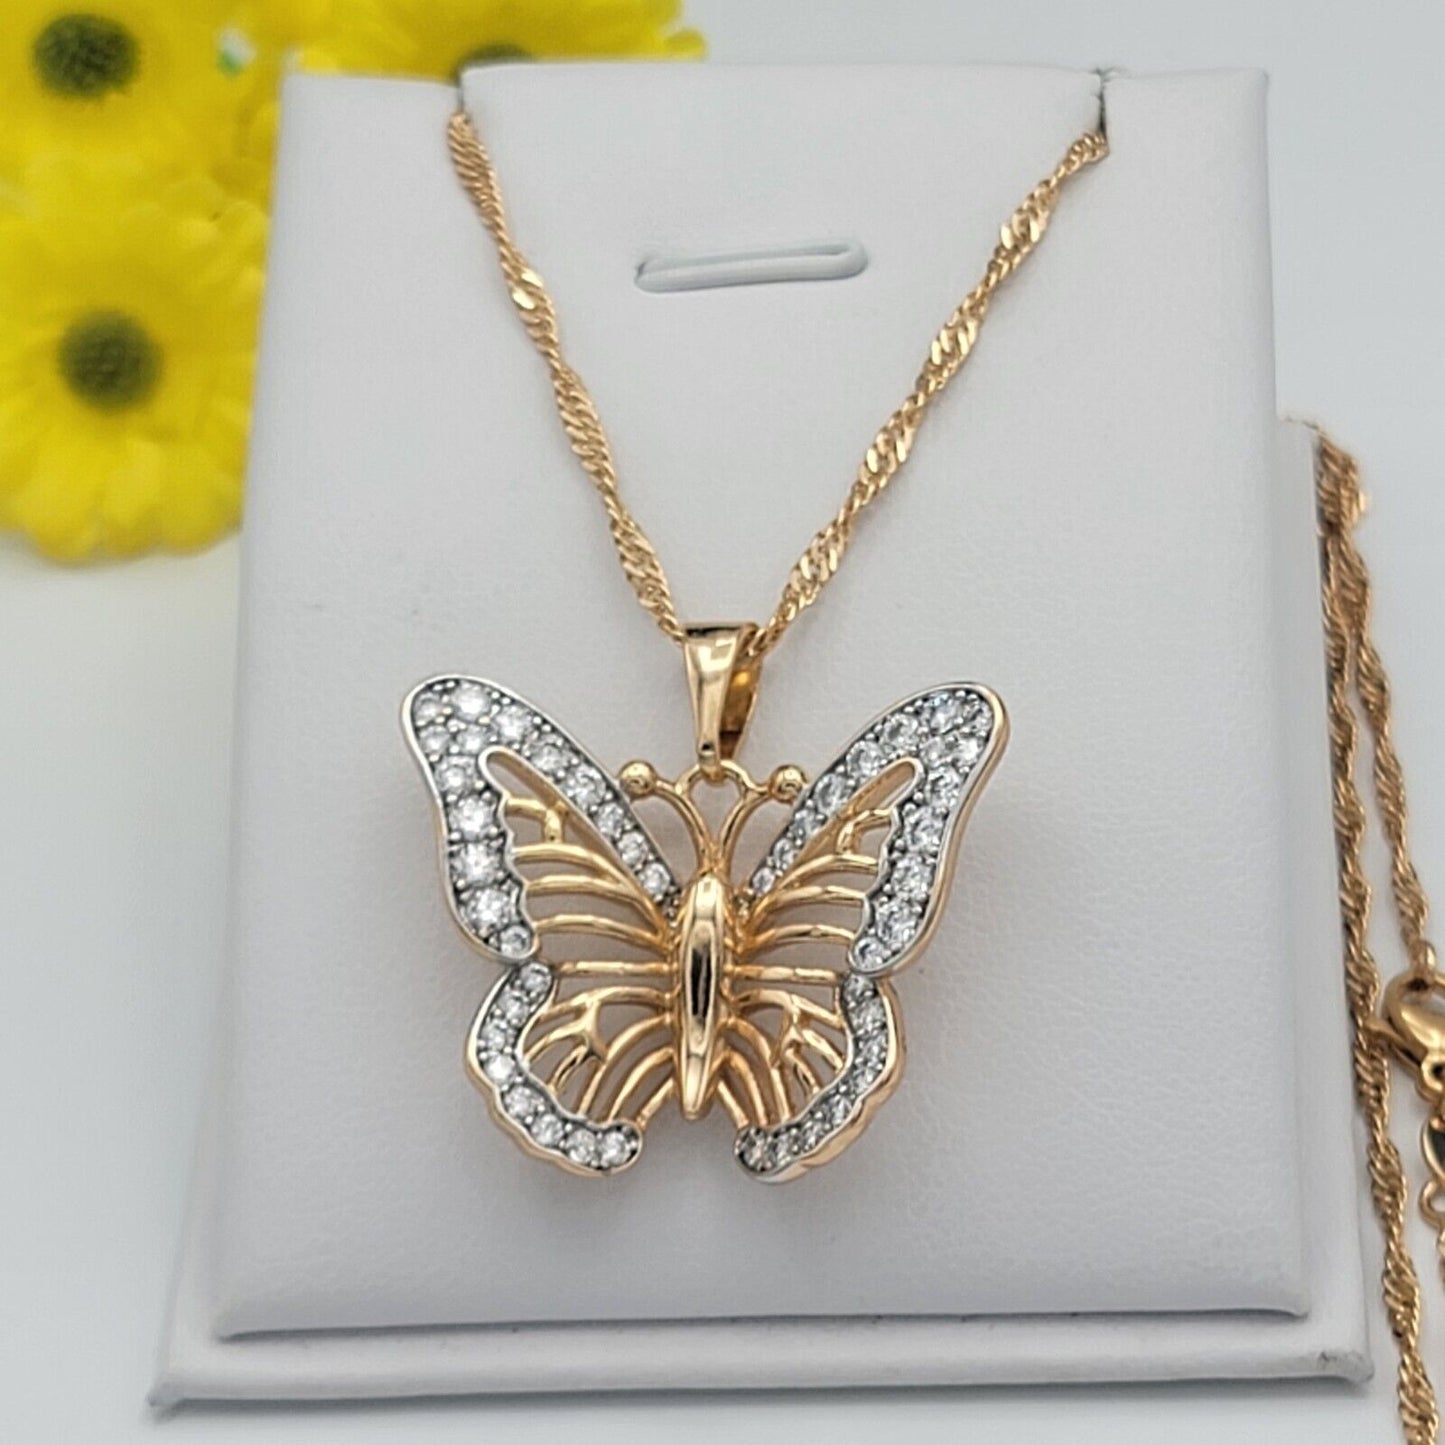 Necklaces - 18K Gold Plated. Clear Crystals Flying Butterfly Pendant & Chain.